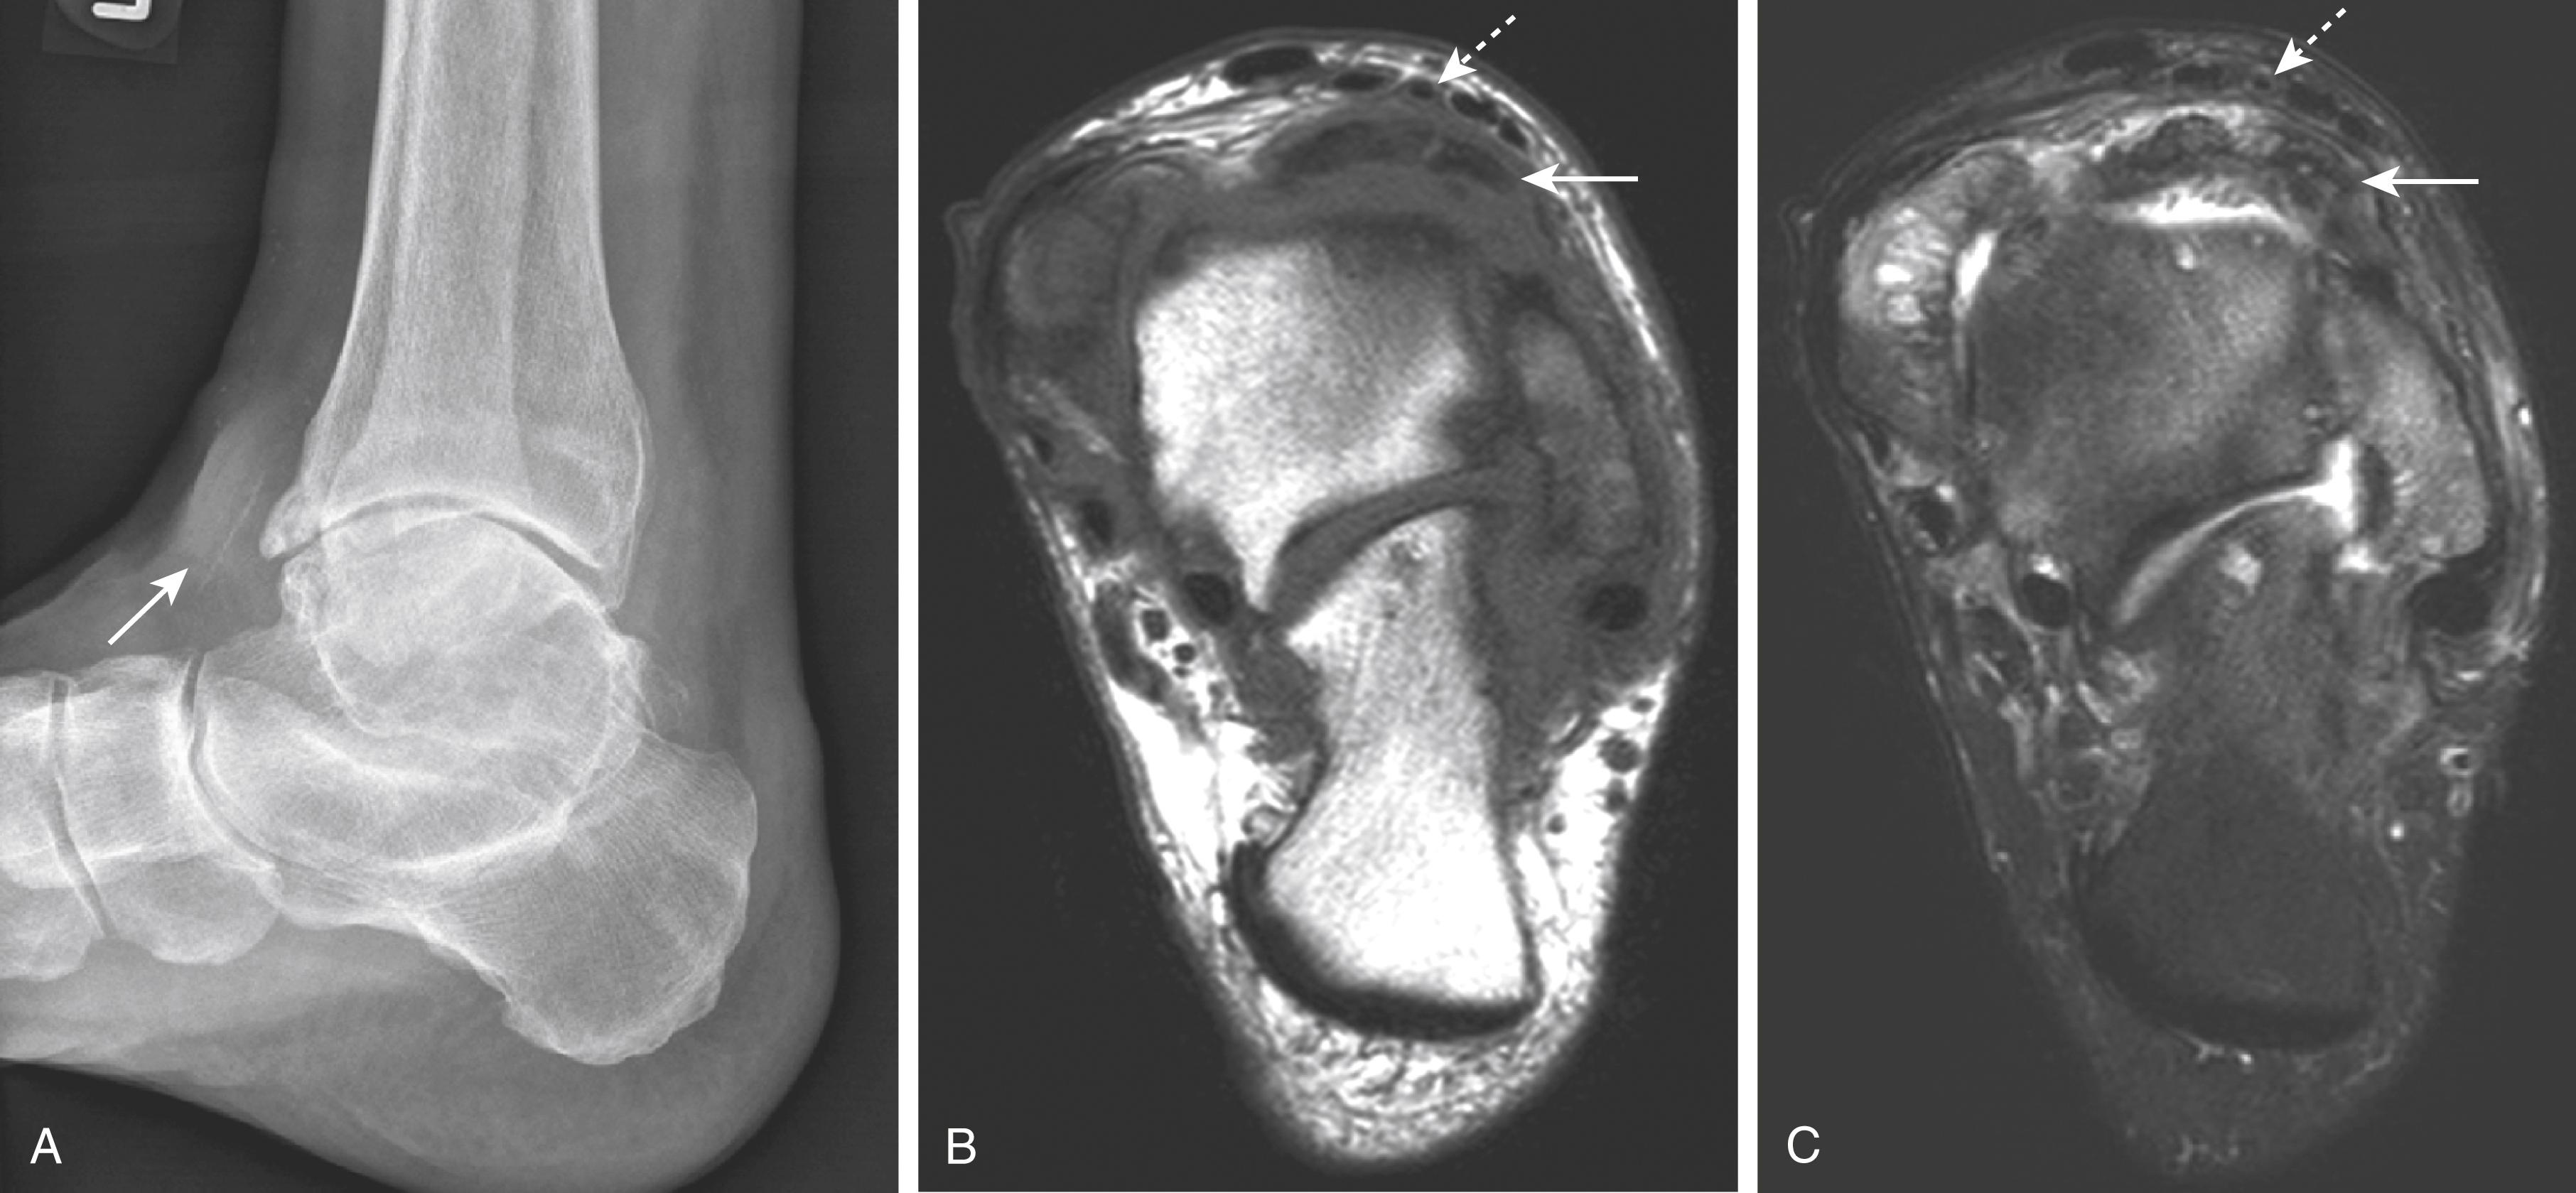 FIG. 181.3, A, Lateral radiograph of a patient with osteoarthritis of the ankle and subtalar joint. There is prominent anterior osteophyte formation at the anterior aspect of the joint with associated soft-tissue shadowing (white arrow). The axial T1-weighted (B) and T2-weighted with fat suppression (C) magnetic resonance images show the anterior osteophytosis and associated synovitis (white arrows) impinging on the extensor tendons. The anterior tibial artery is displaced anteriorly (broken white arrows) between the extensor tendons. The deep peroneal nerve is not visualized.